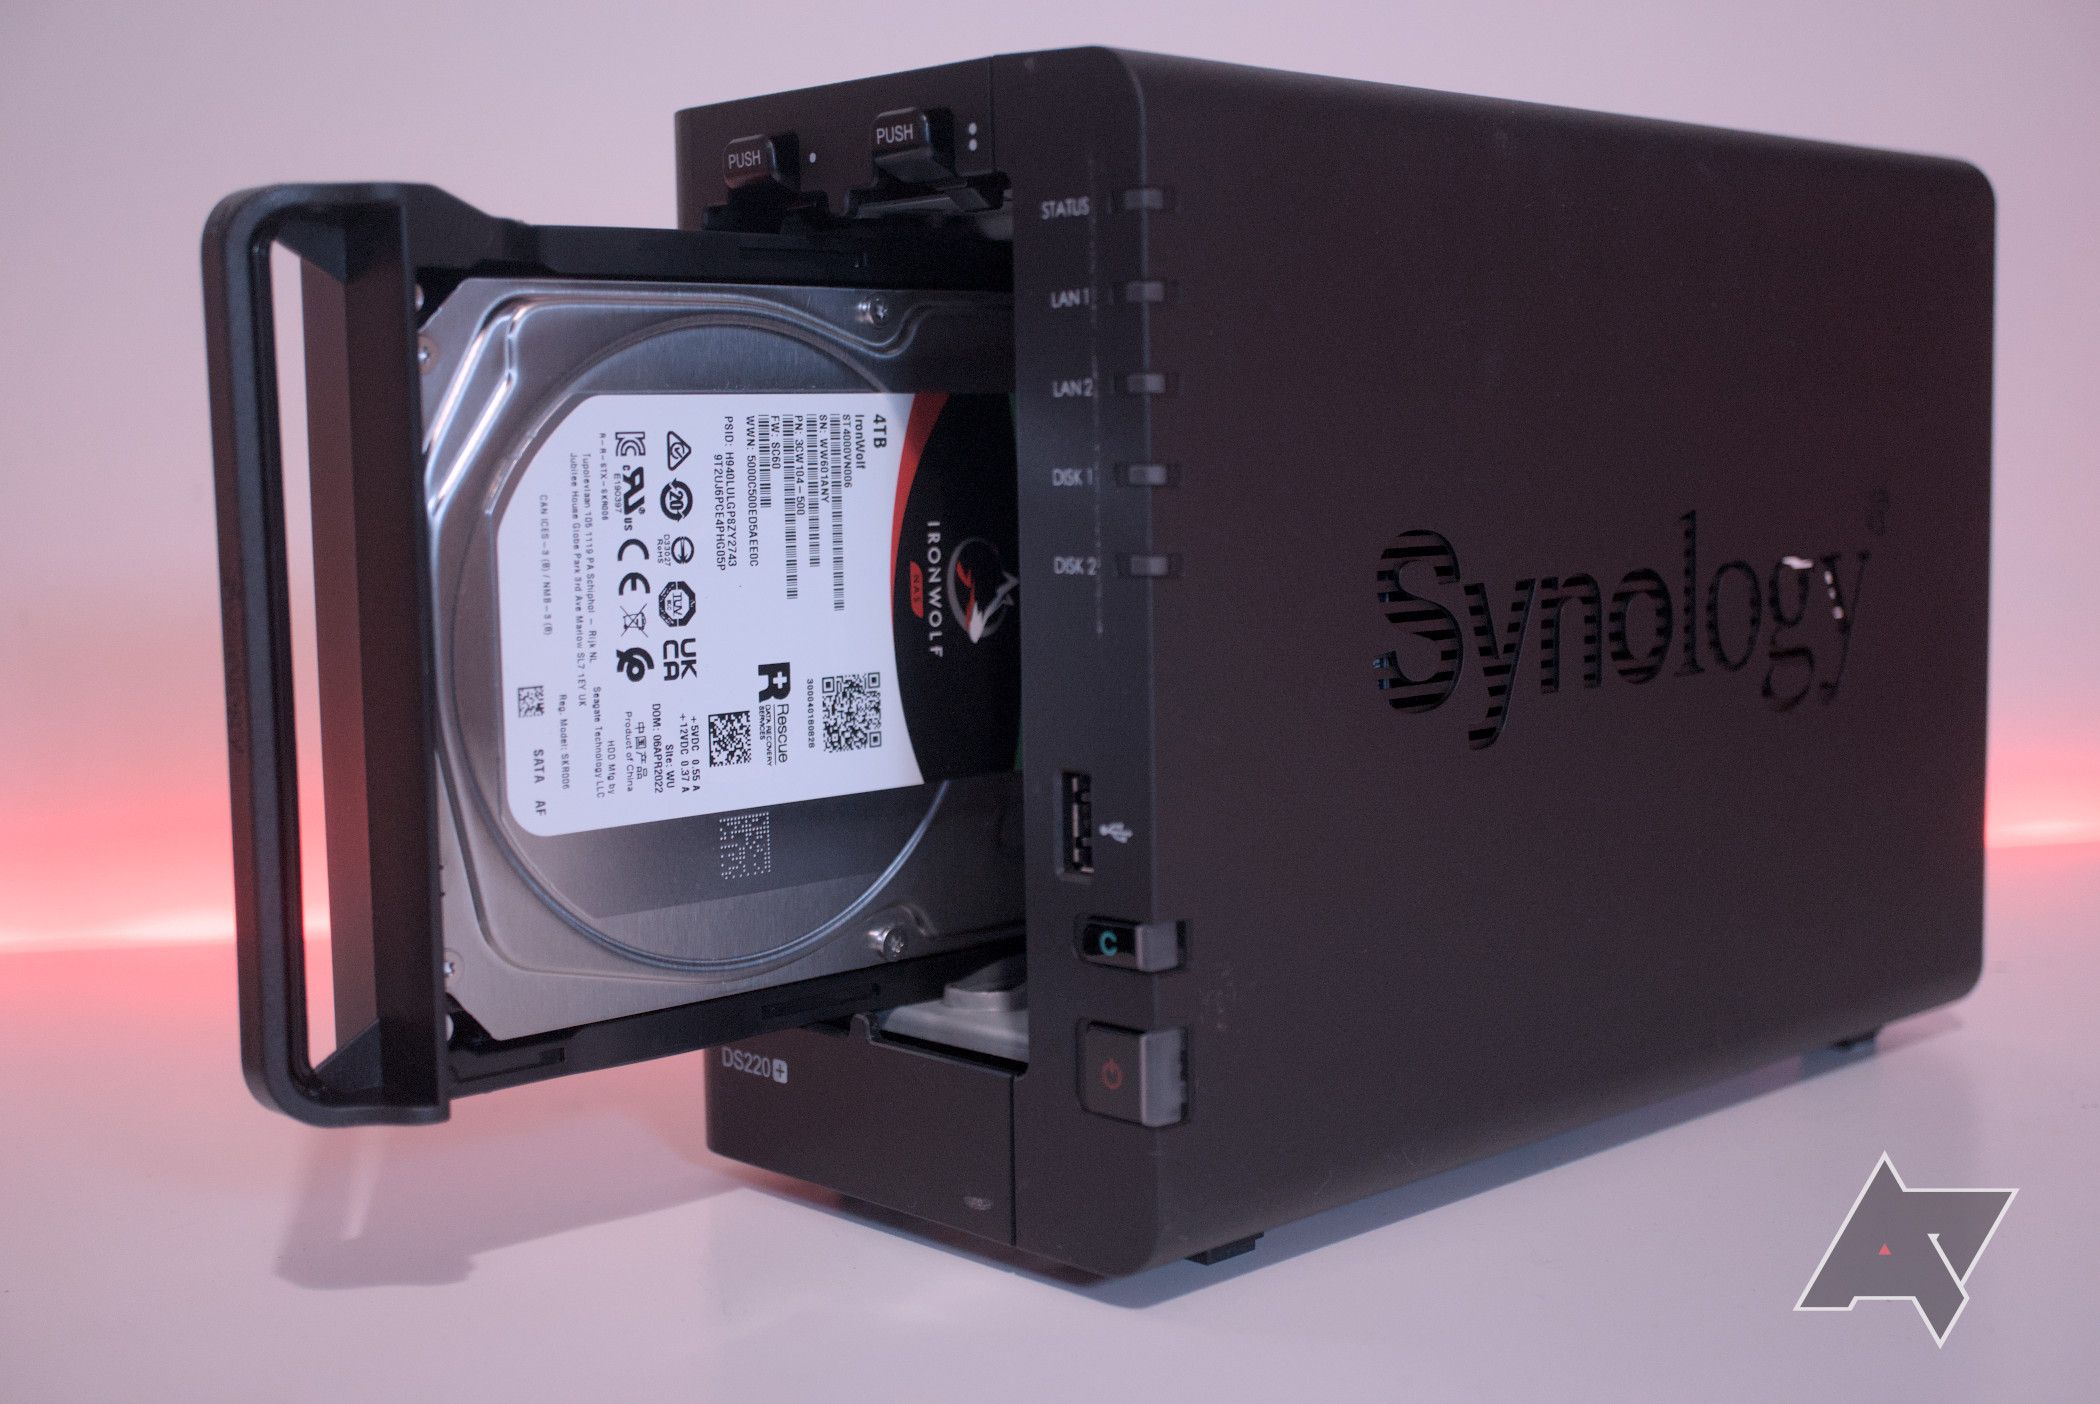 Synology DiskStation DS220+ tray have inserted in the front